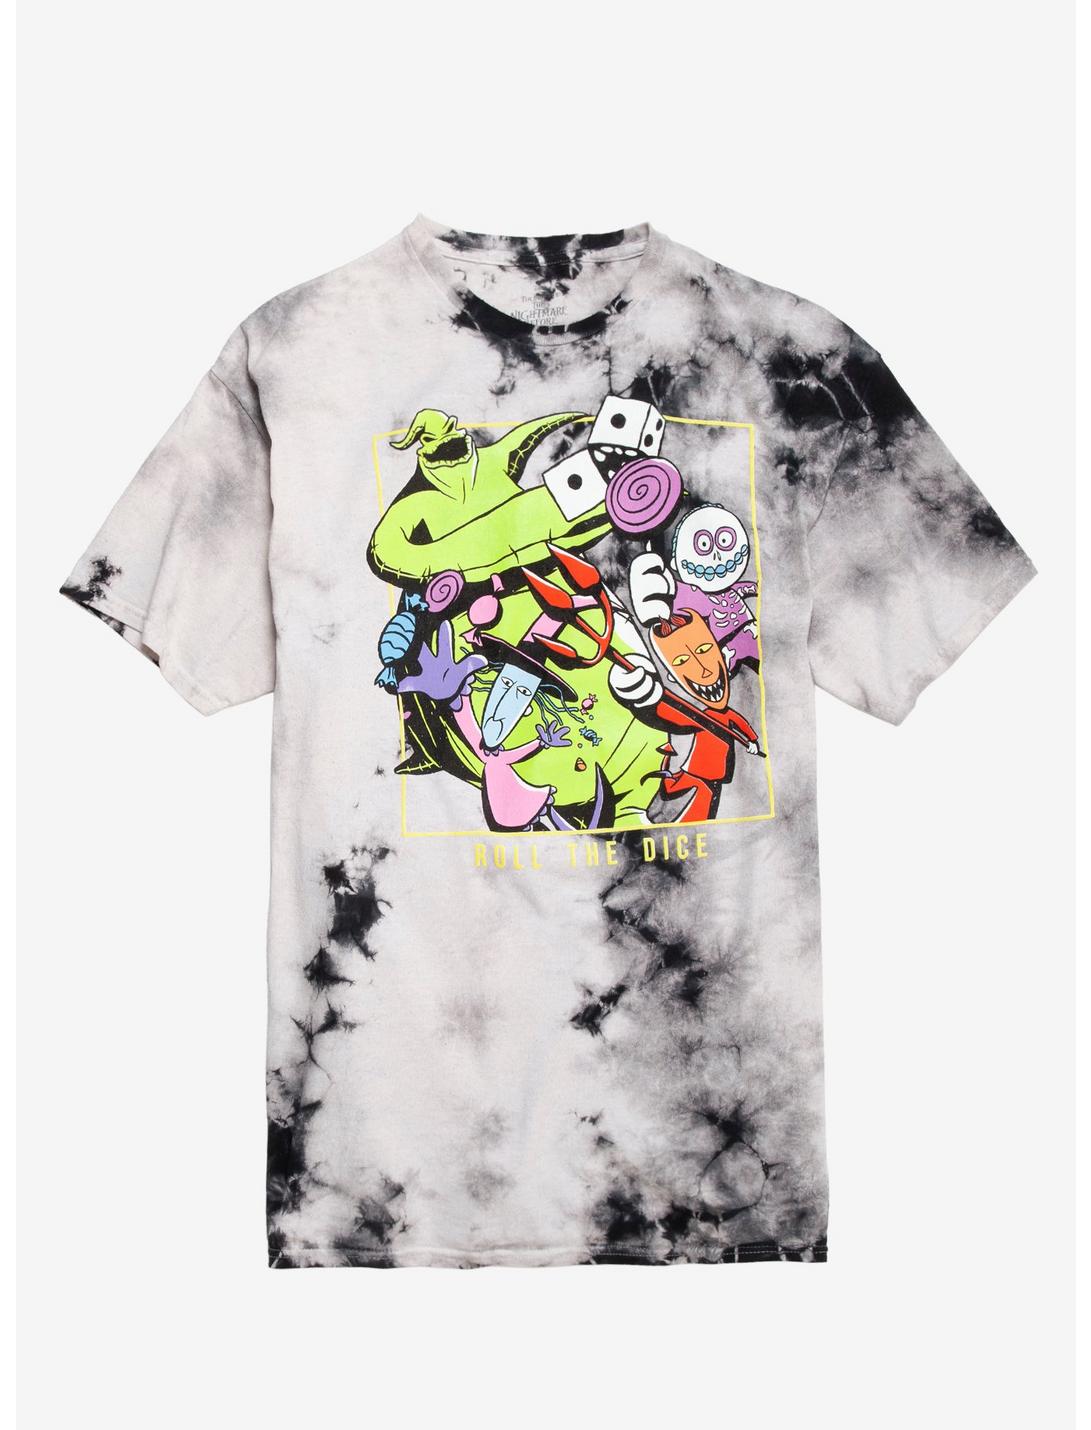 The Nightmare Before Christmas Oogie's Boys Tie-Dye T-Shirt | Hot Topic